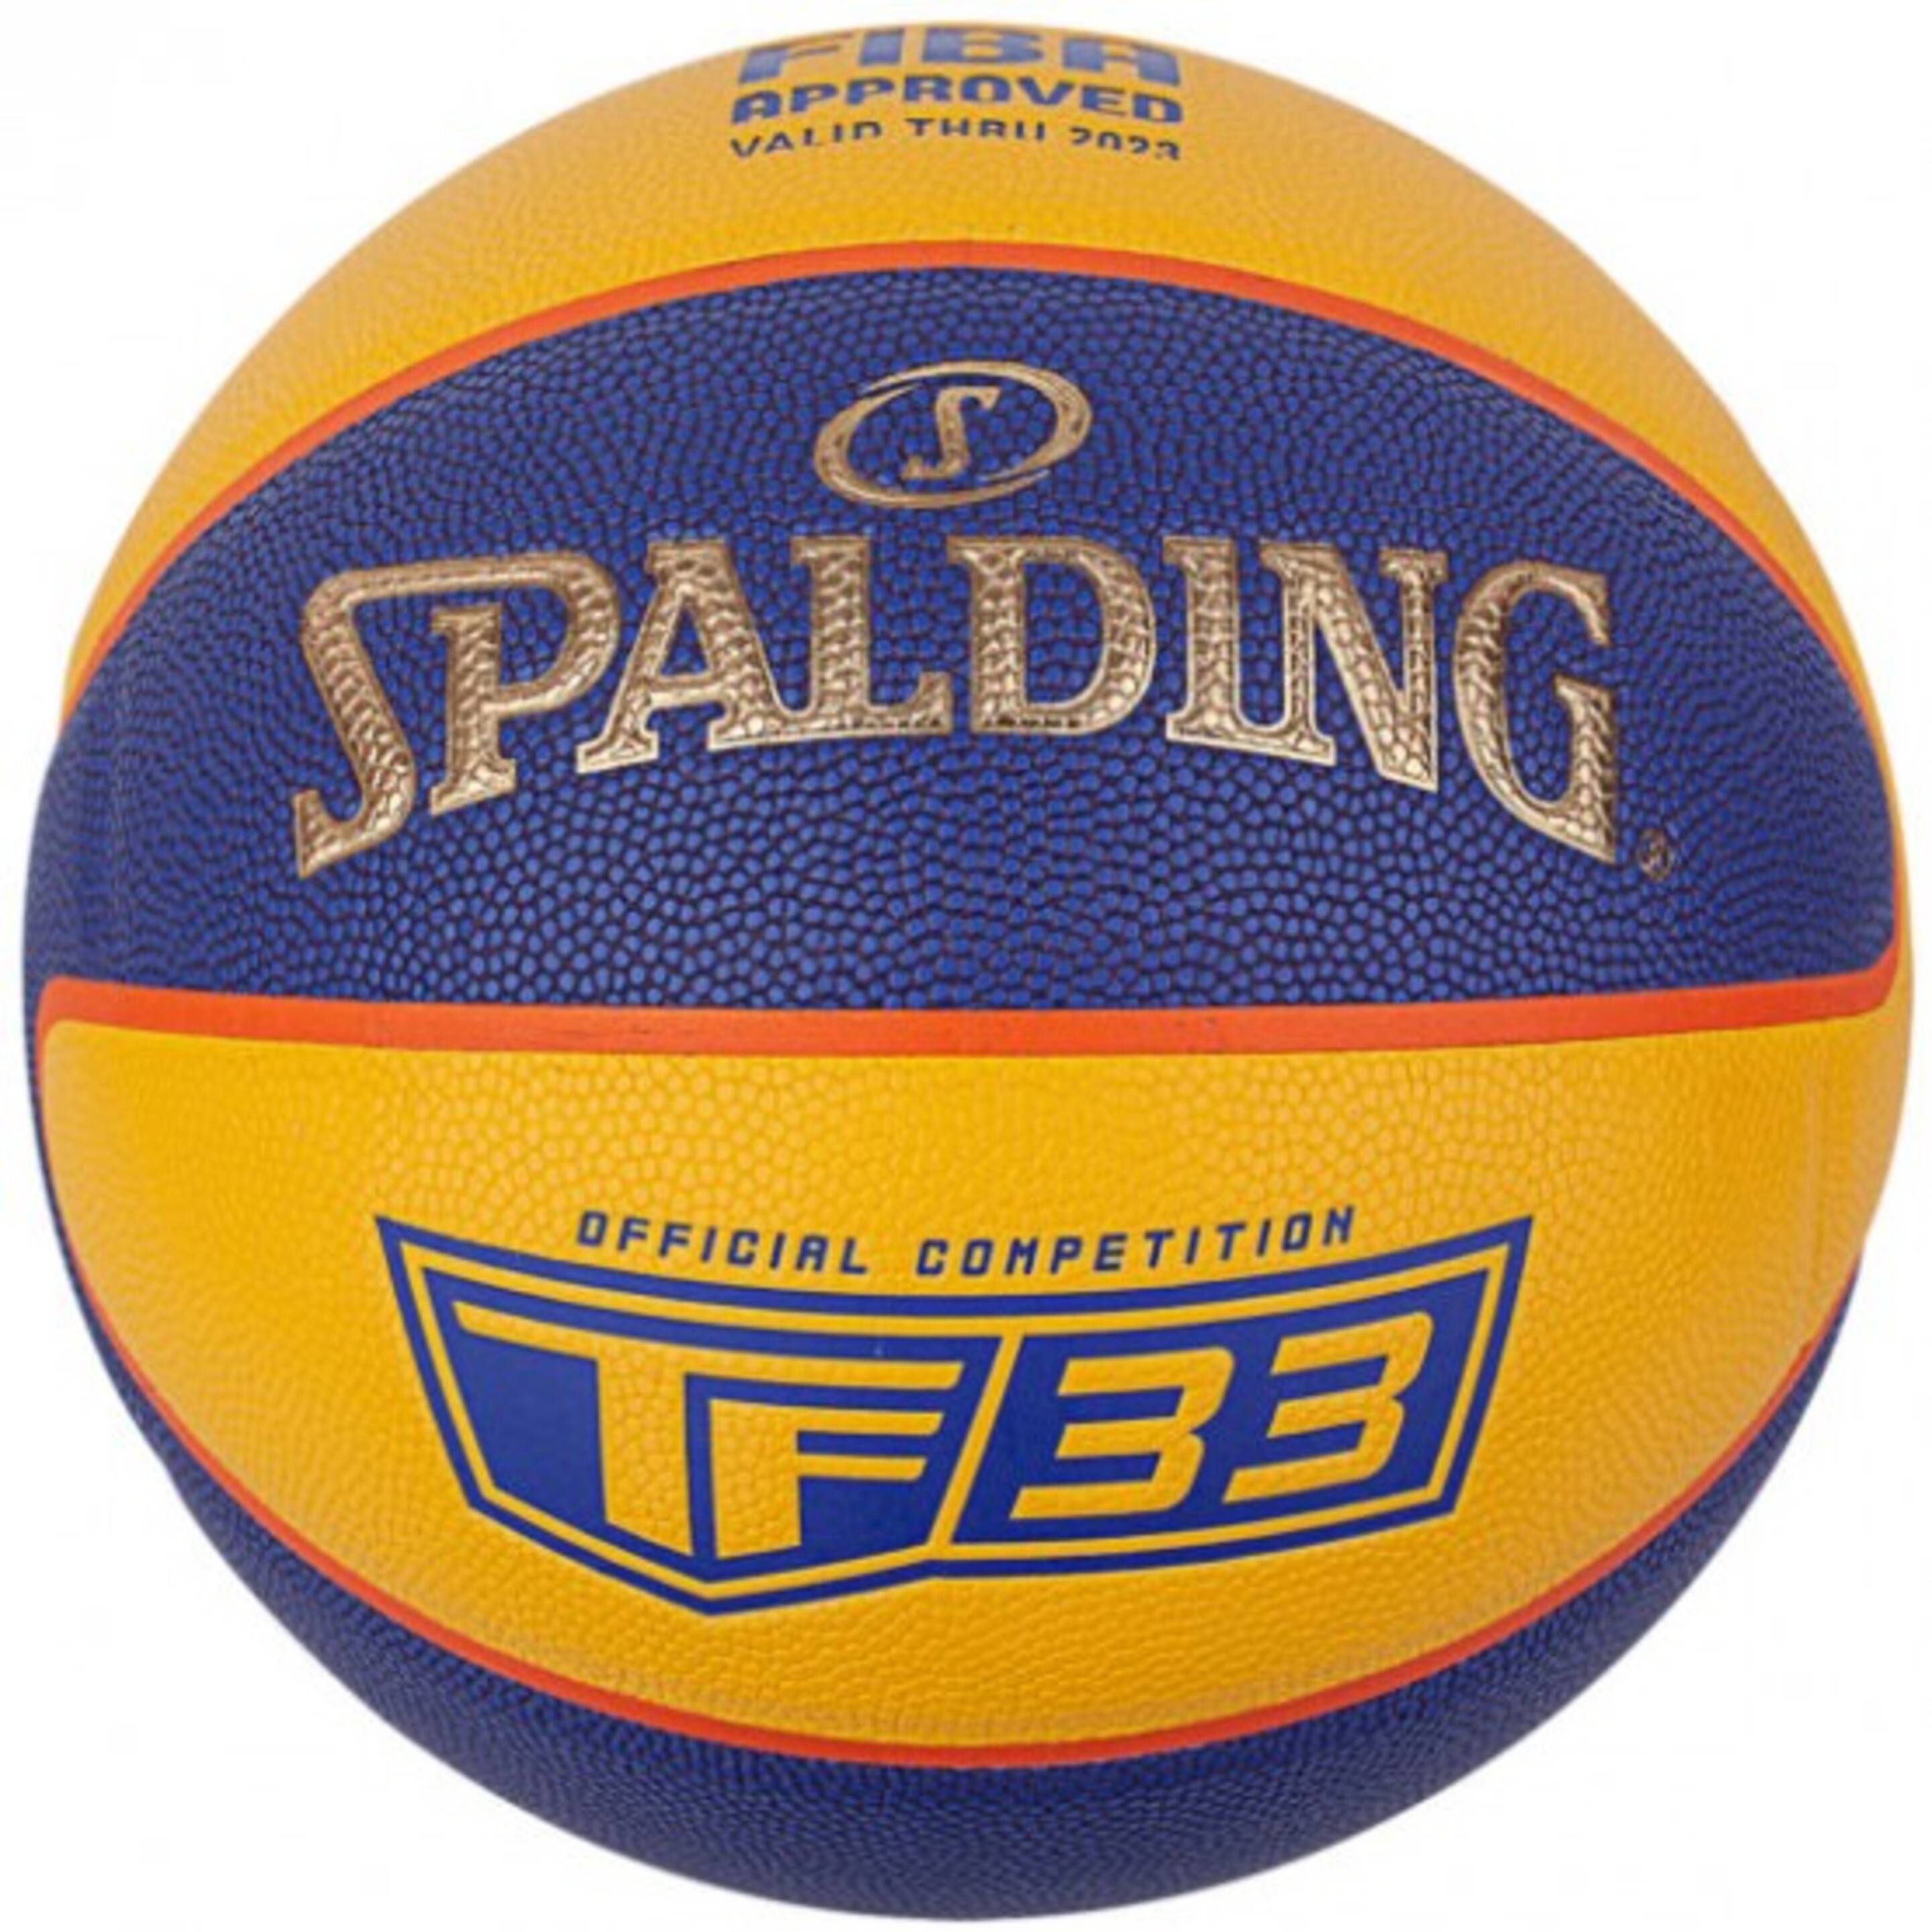 Bola Spalding Tf-33 Gold - In/out Sz6. Caucho